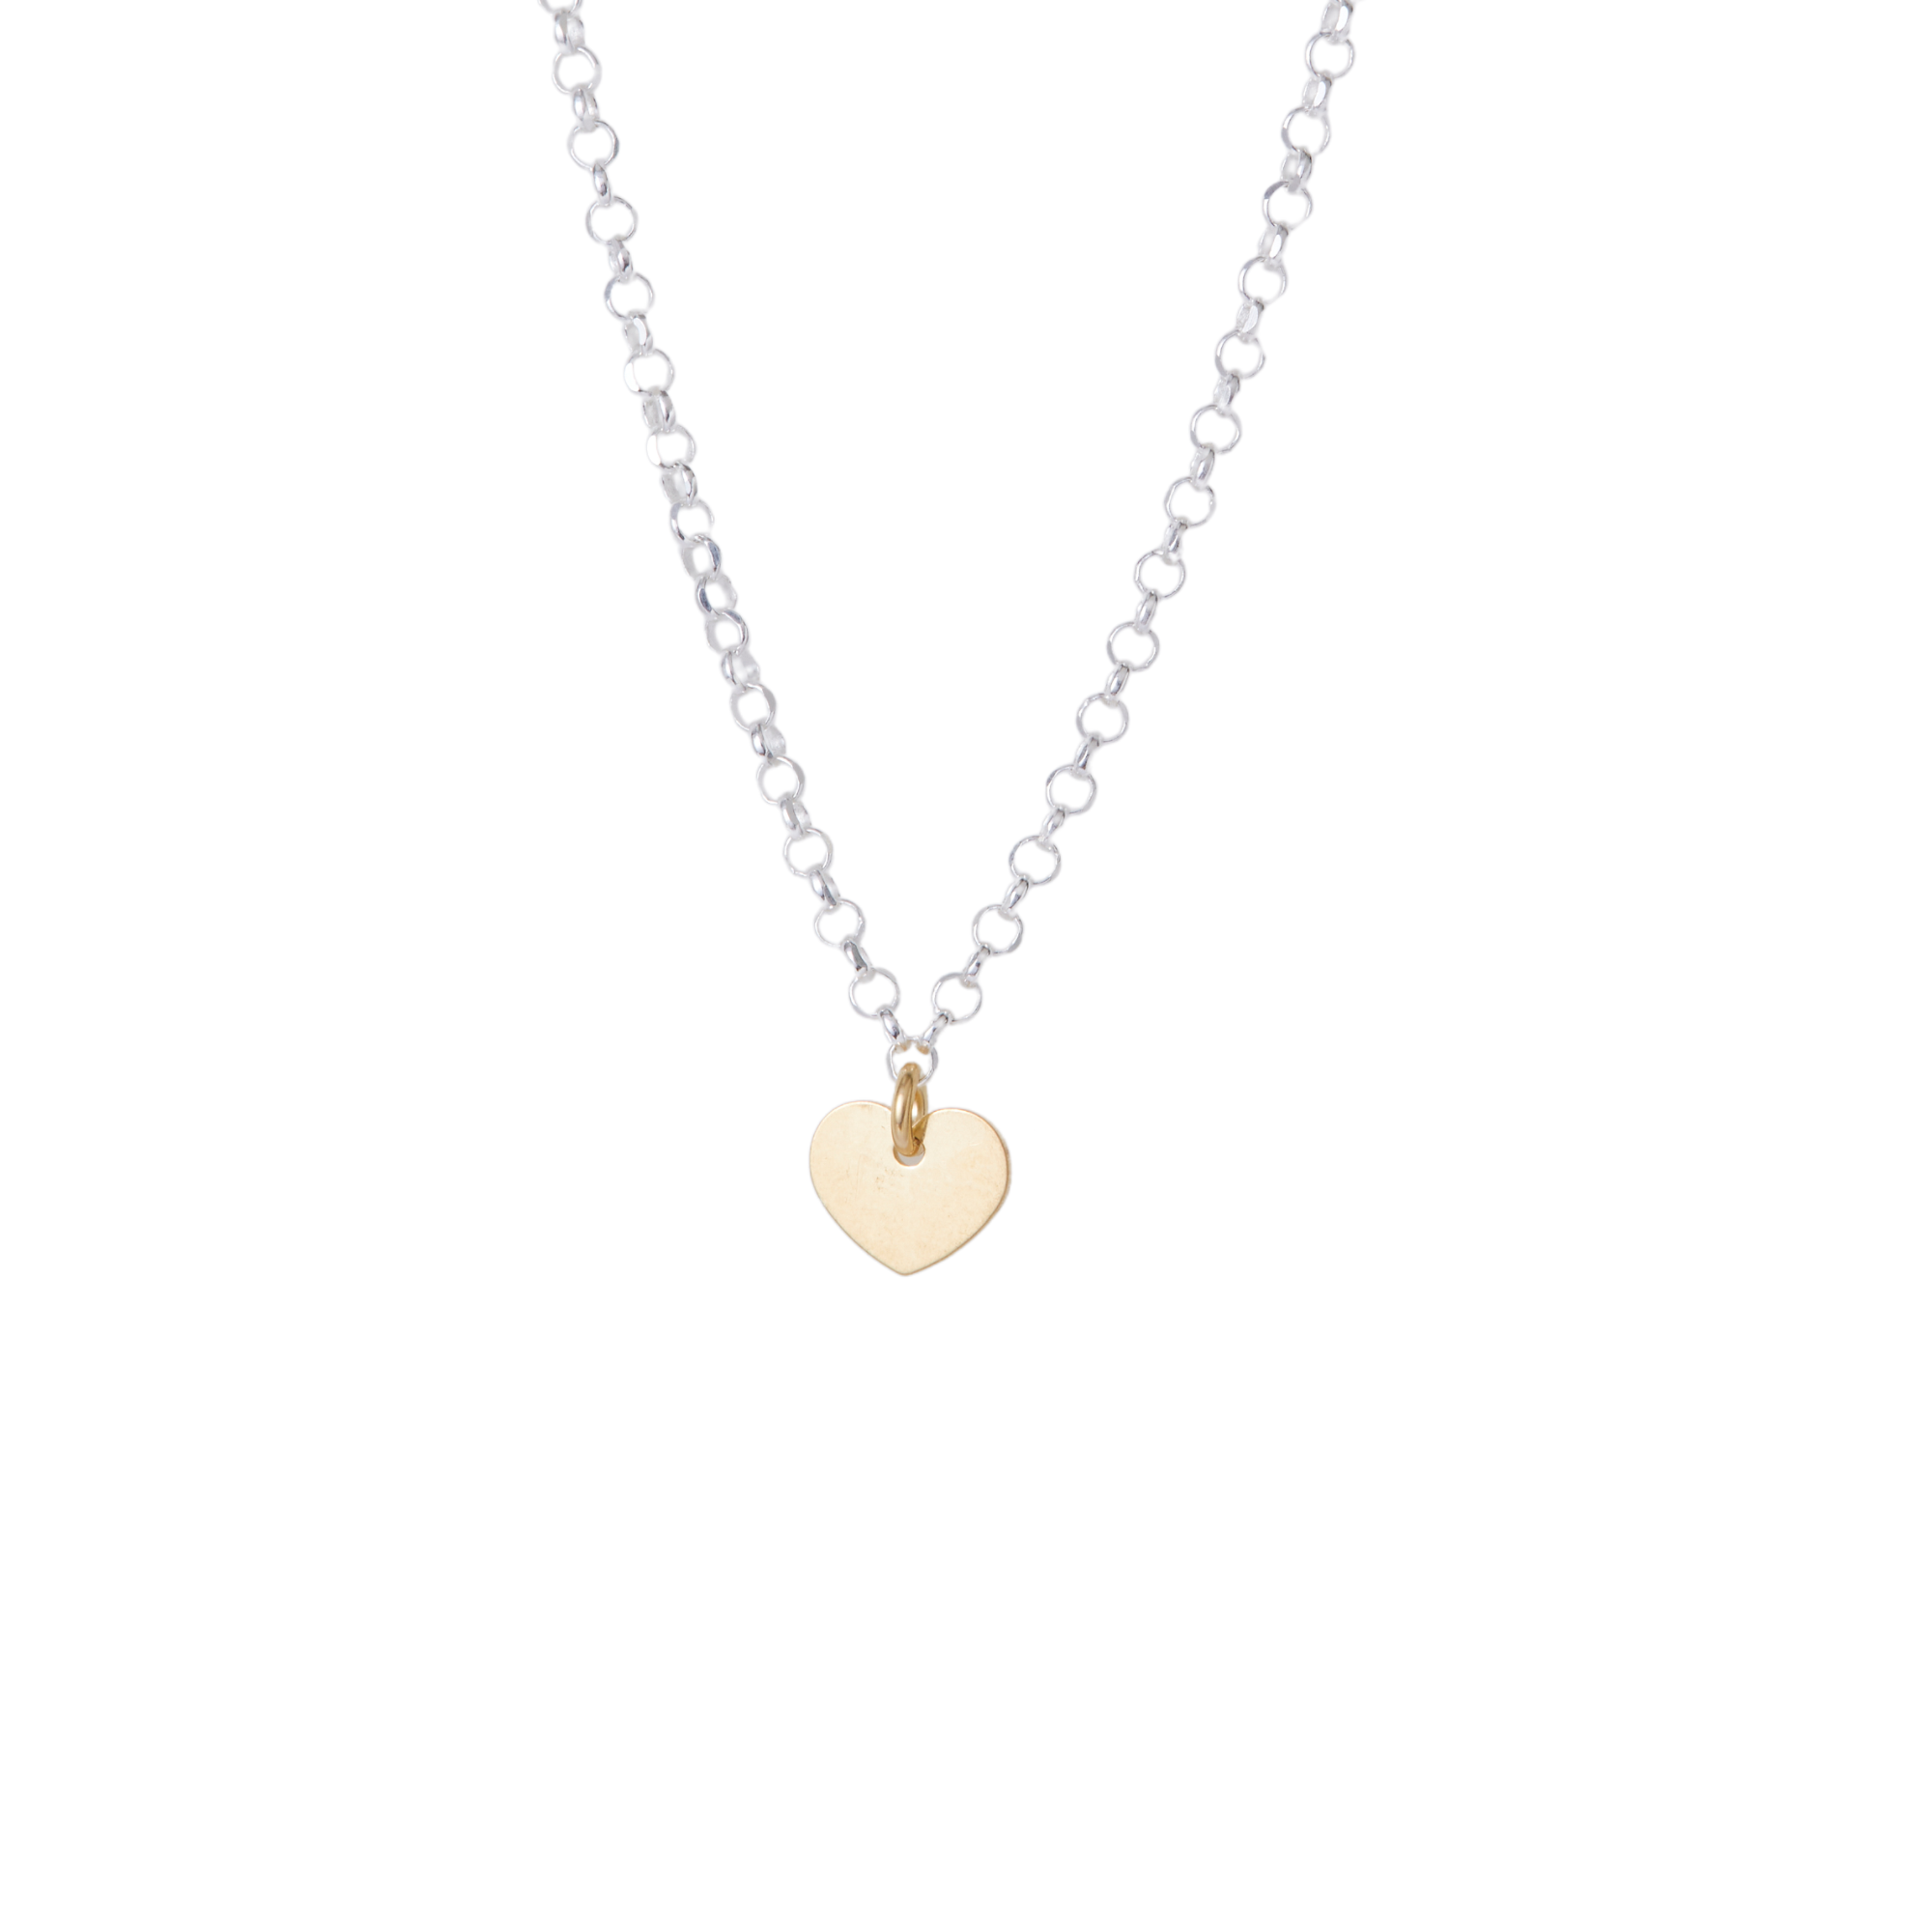 THE HEART PENDANT CHAIN NECKLACE